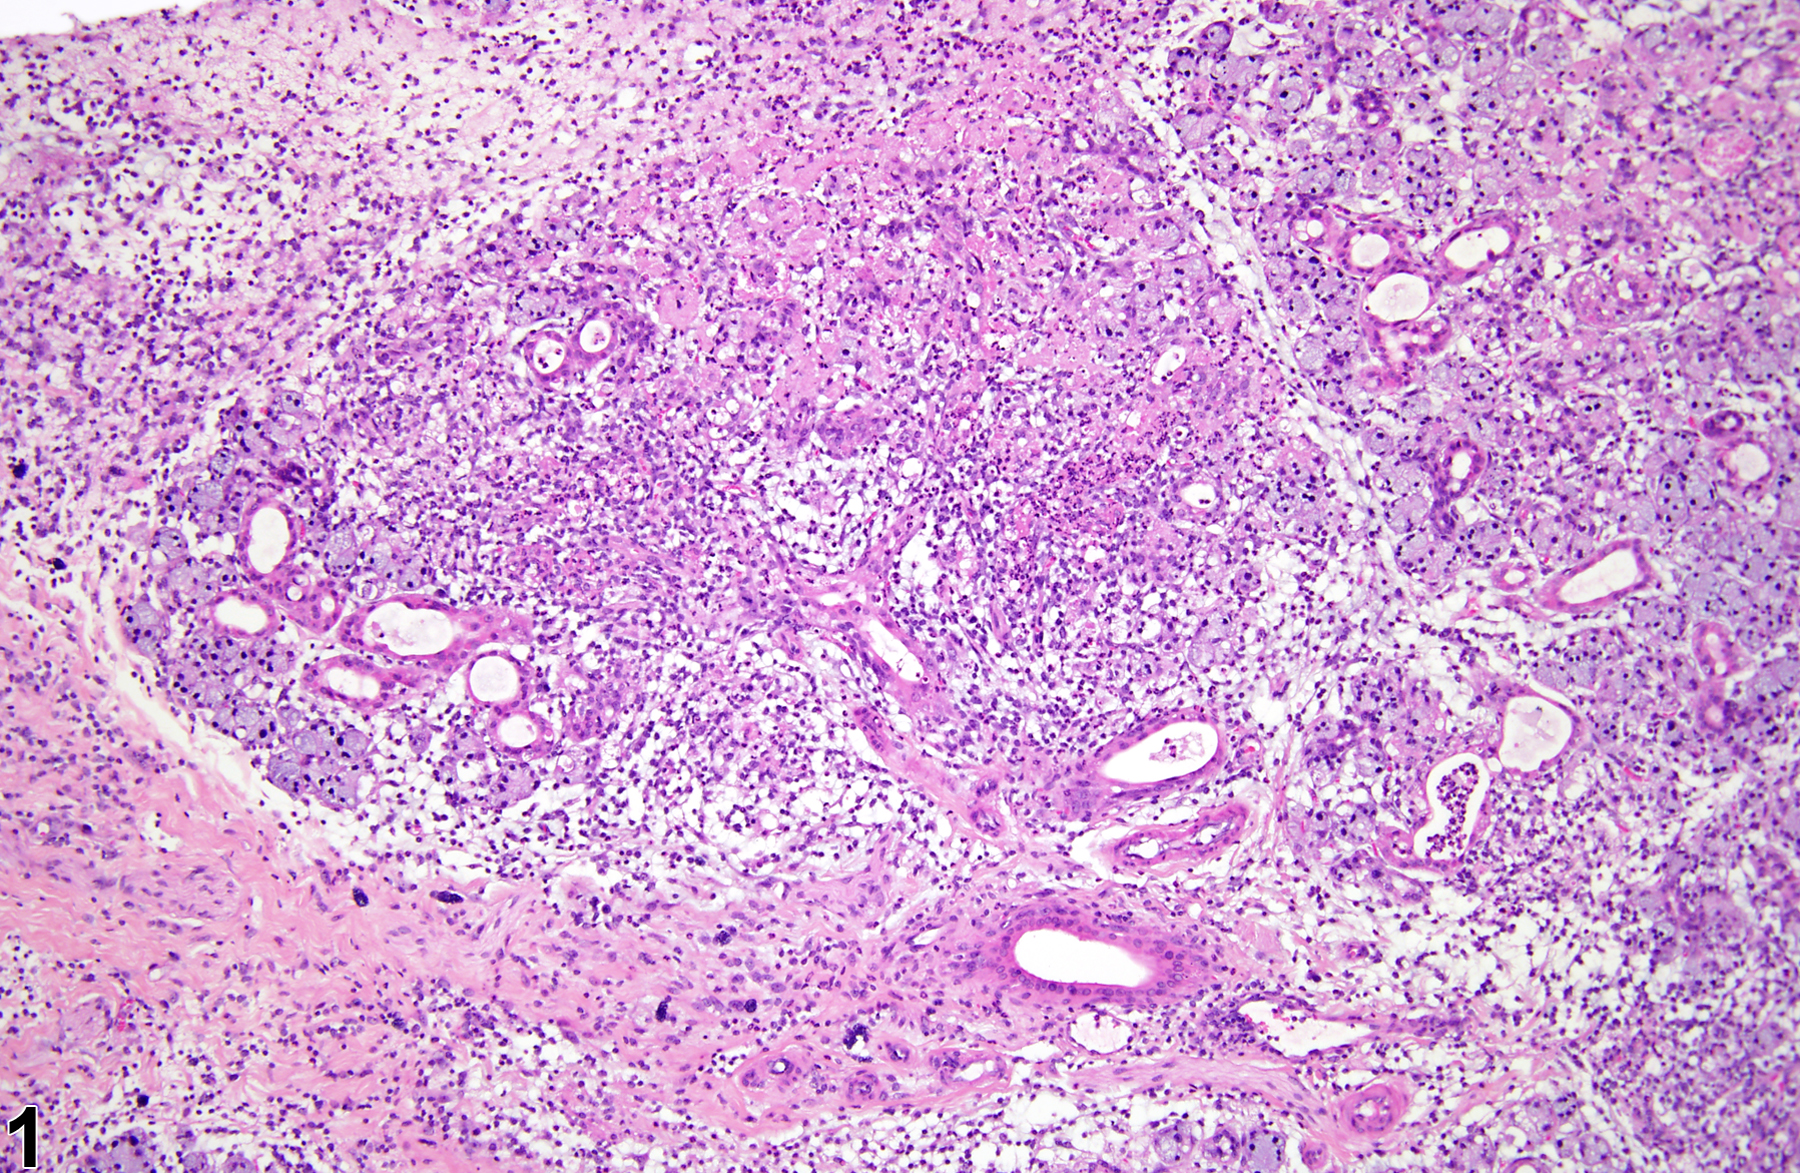 Image of inflammation in the salivary gland from a male F344/N rat in a subchronic study